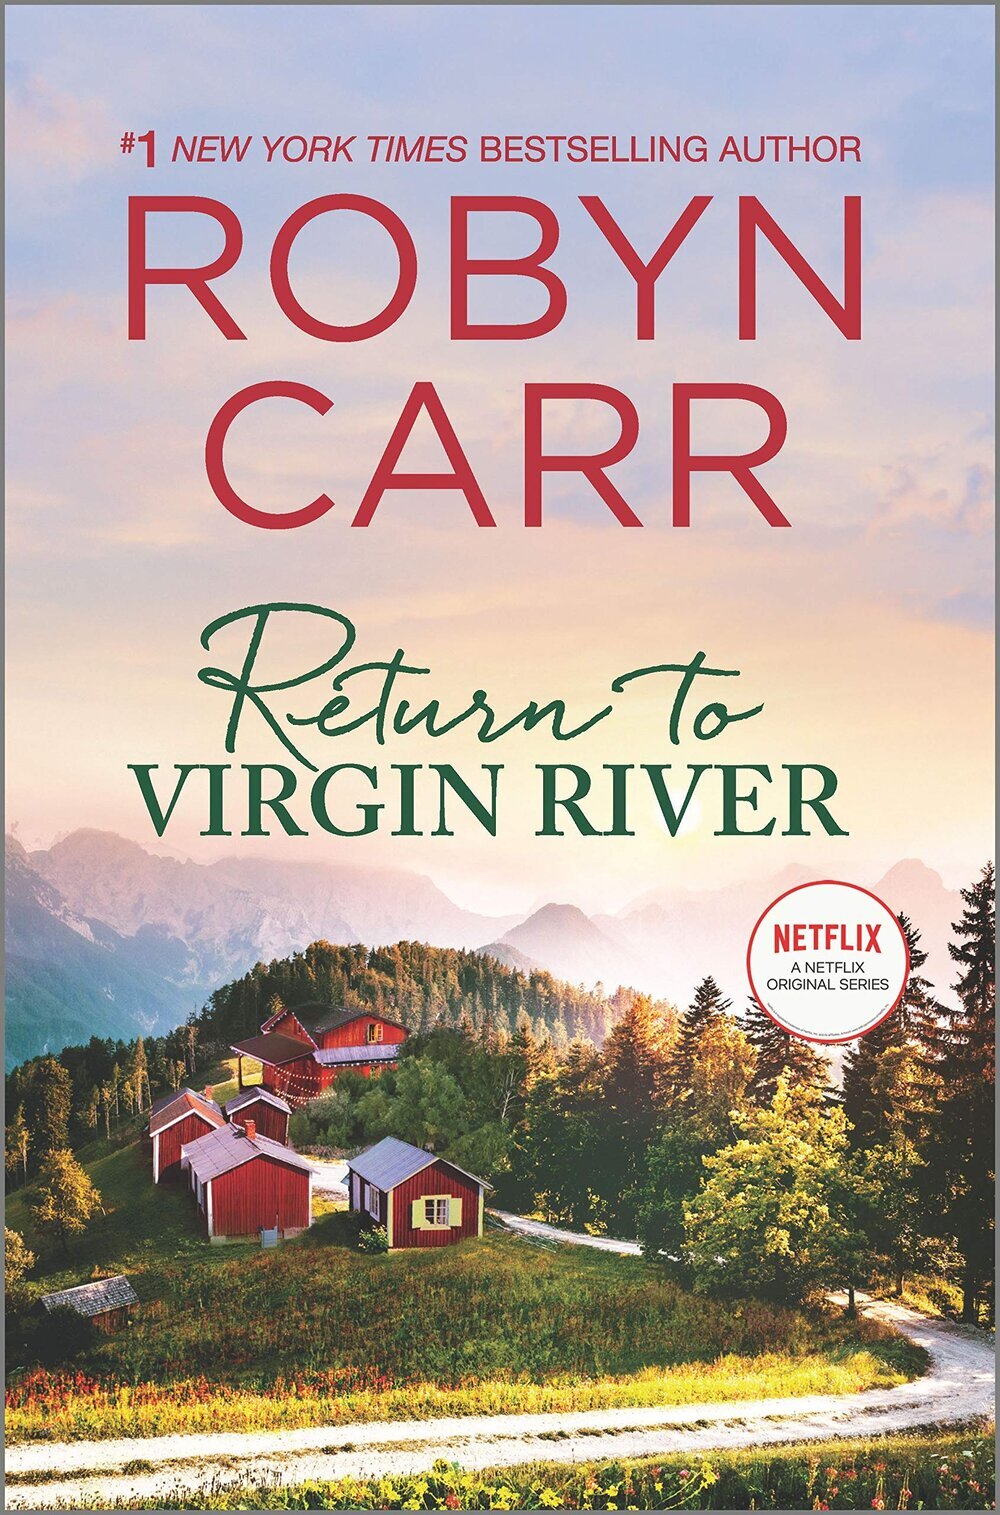 Best of Romance Return to Virgin River by Robyn Carr.jpg